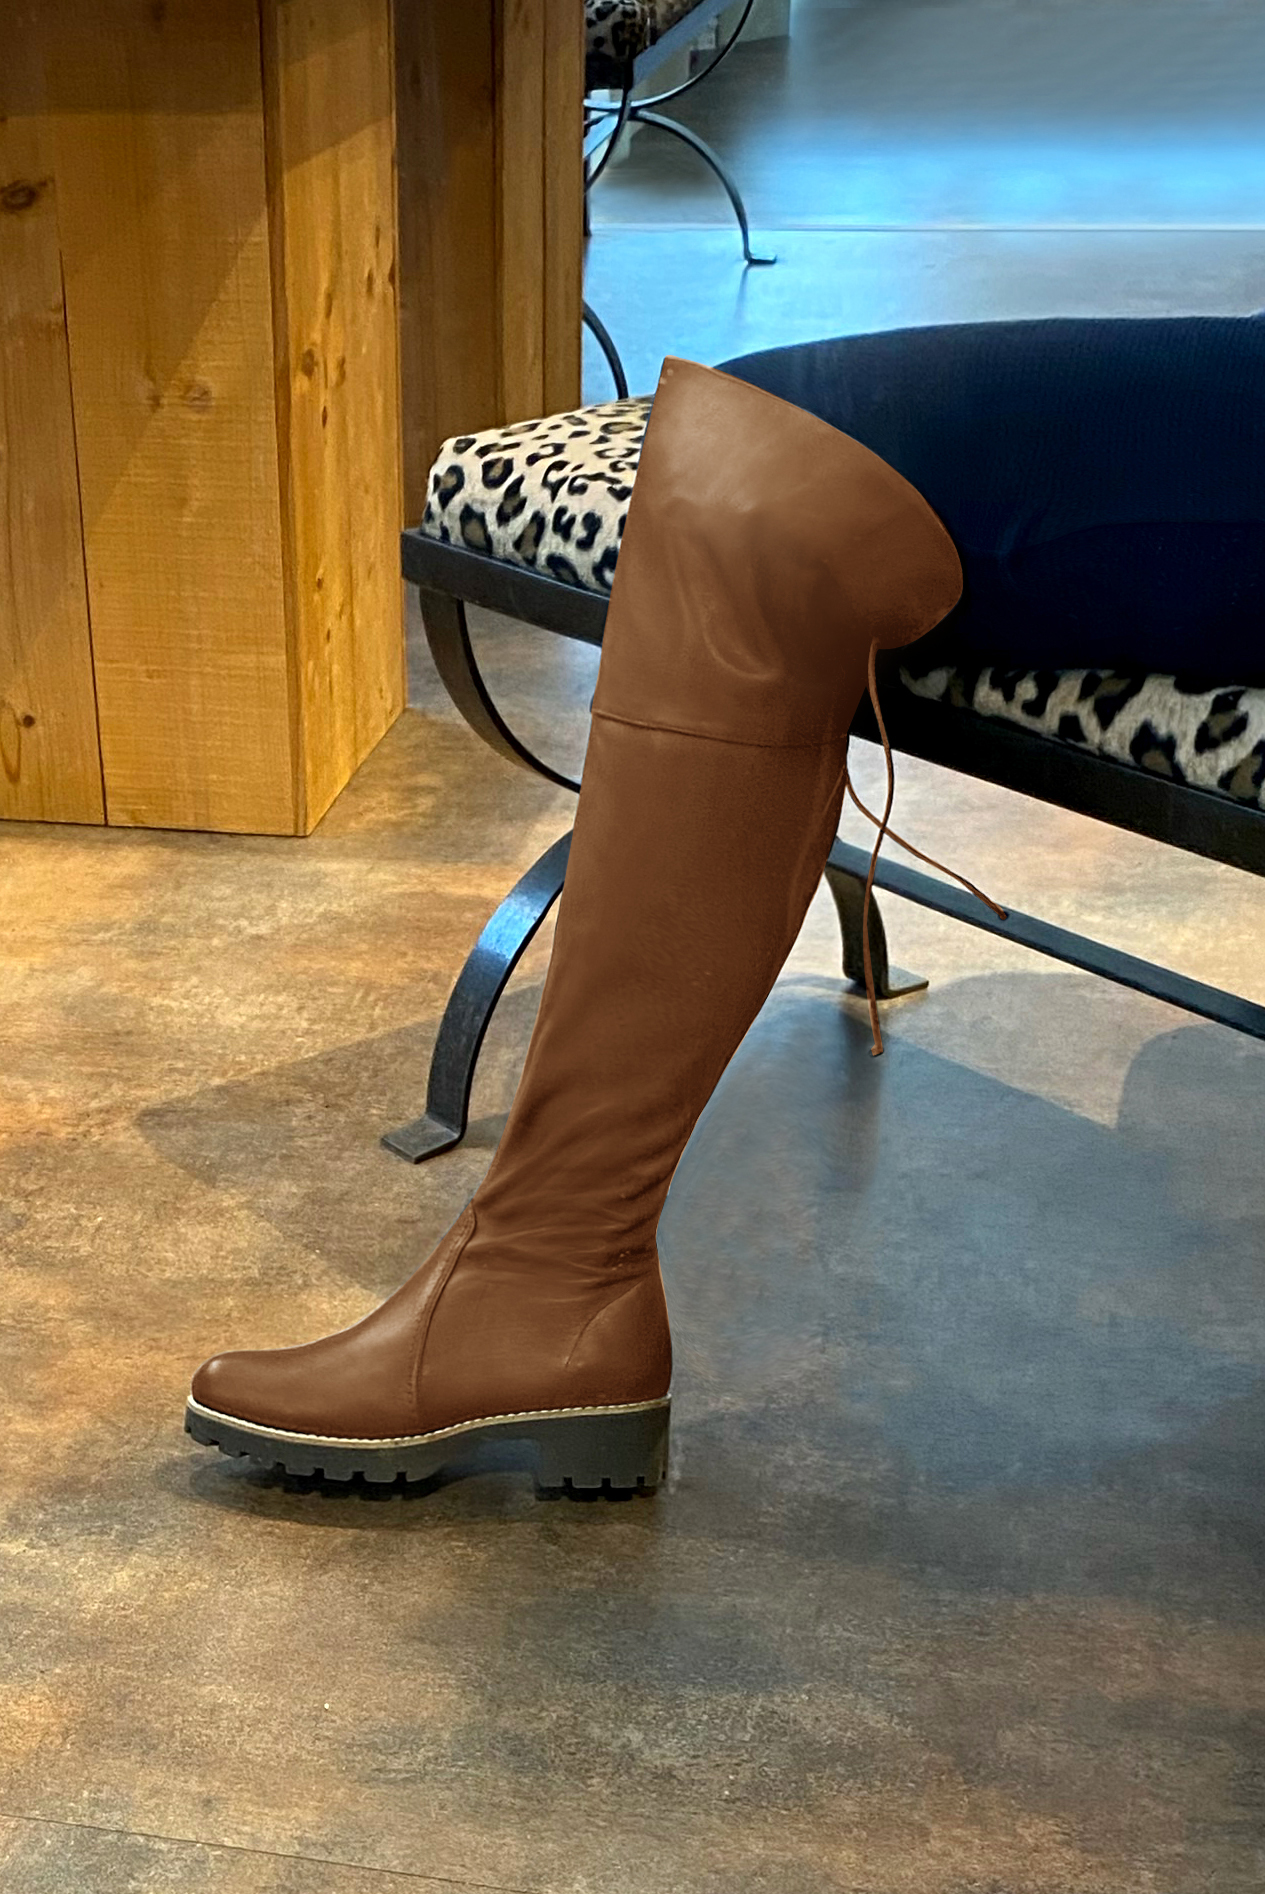 Caramel brown women's leather thigh-high boots. Round toe. Low rubber soles. Made to measure. Worn view - Florence KOOIJMAN